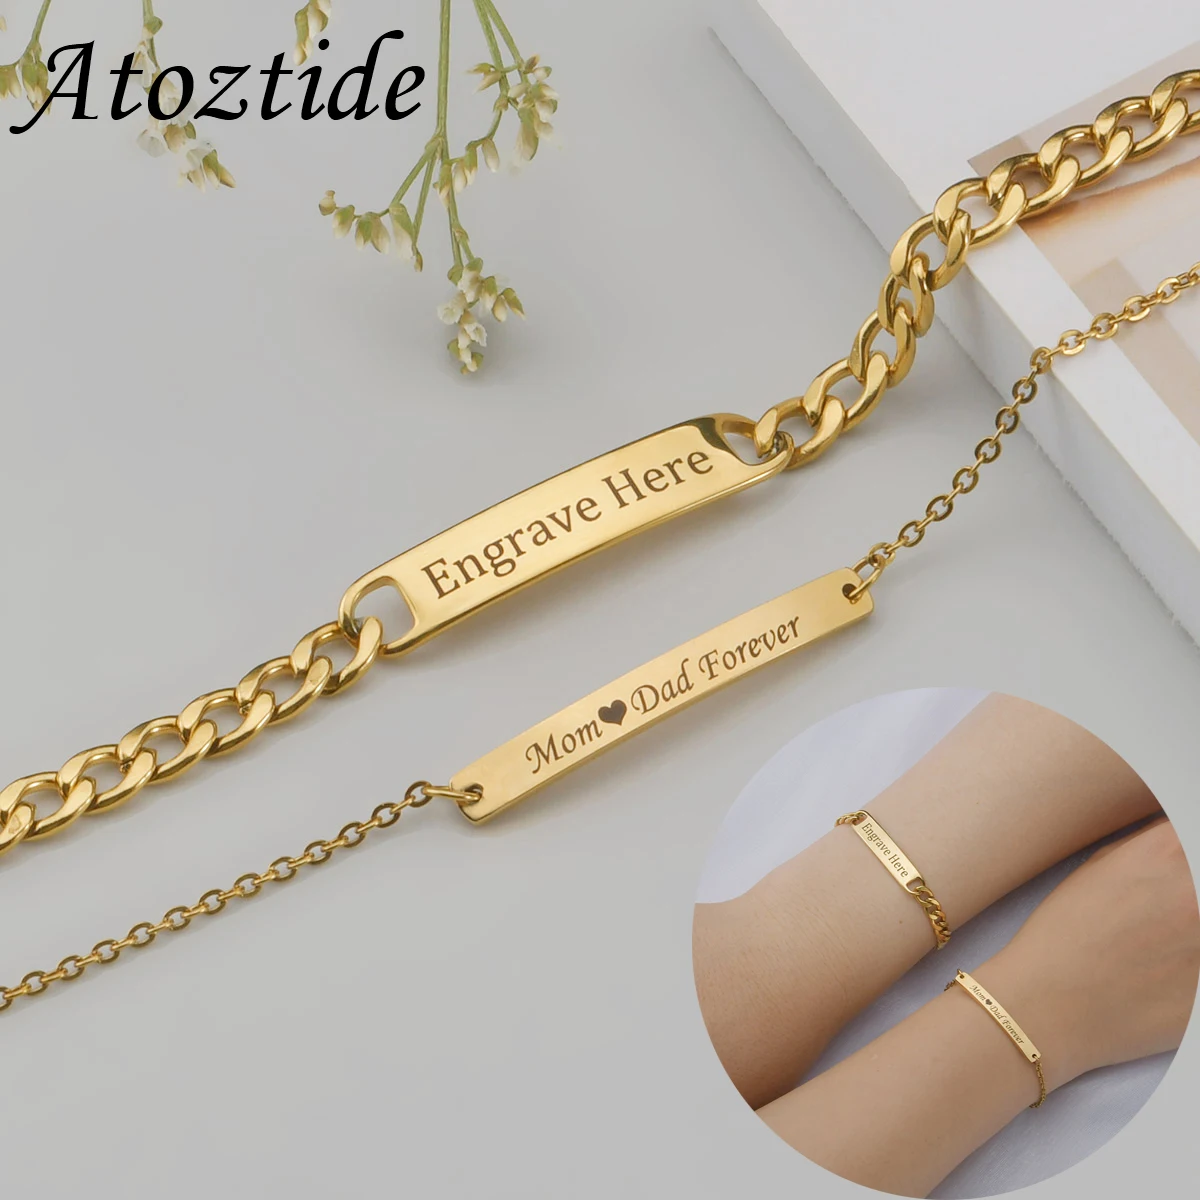 Atoztide Custom Name Bar Nameplate Couple Bracelet Stainless Steel For Men Women Adjustable Link Chain Personalized Jewelry Gift